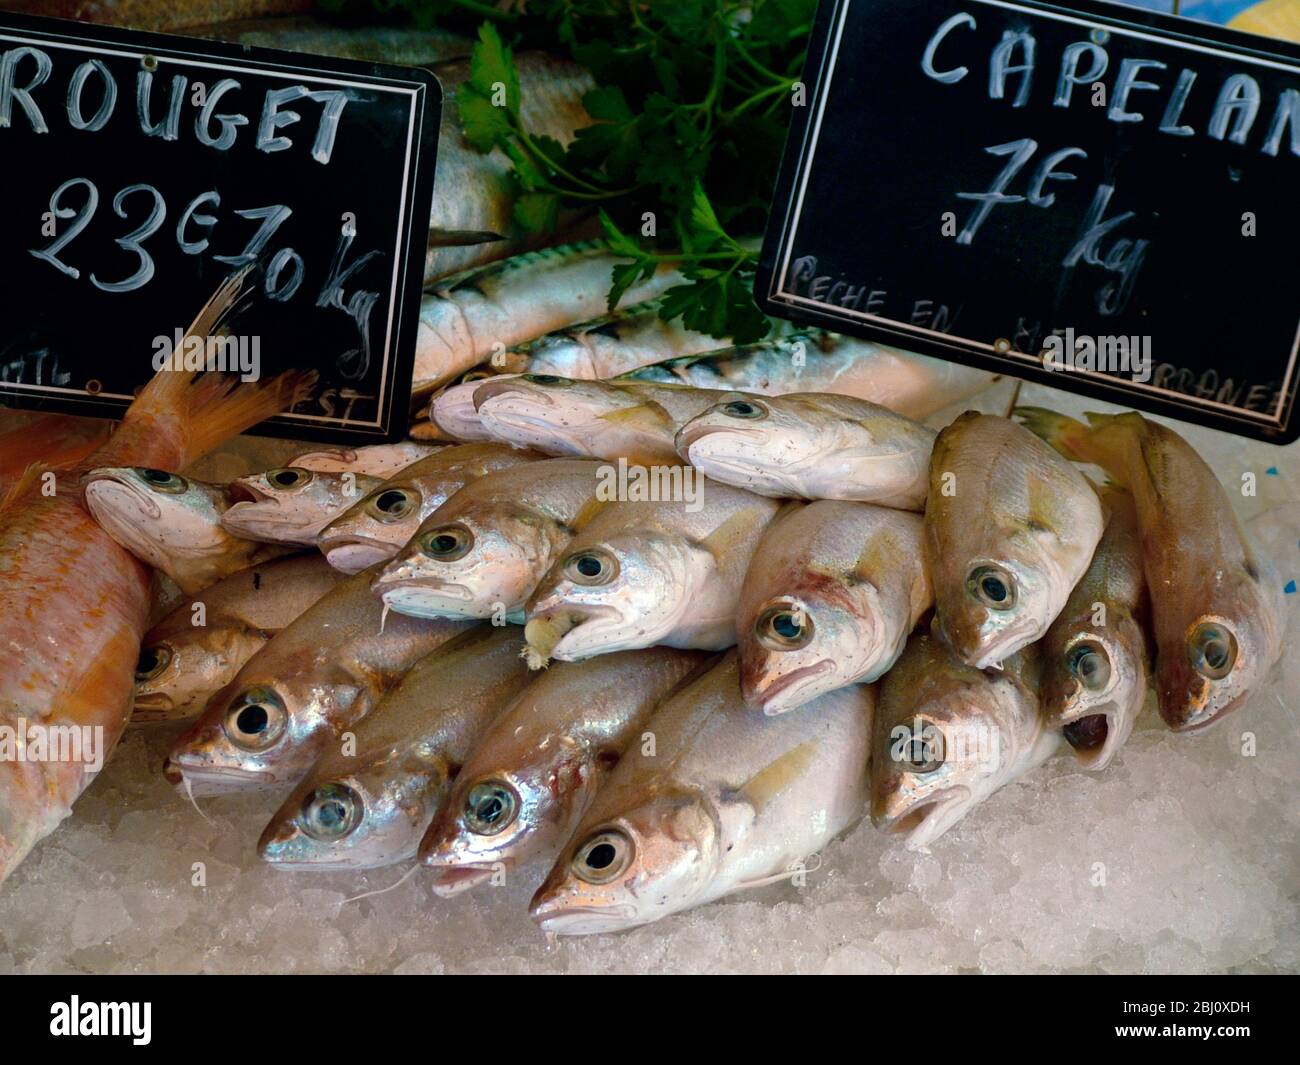 Fresh fish for sale at covered market in Menton, south of France - Stock Photo